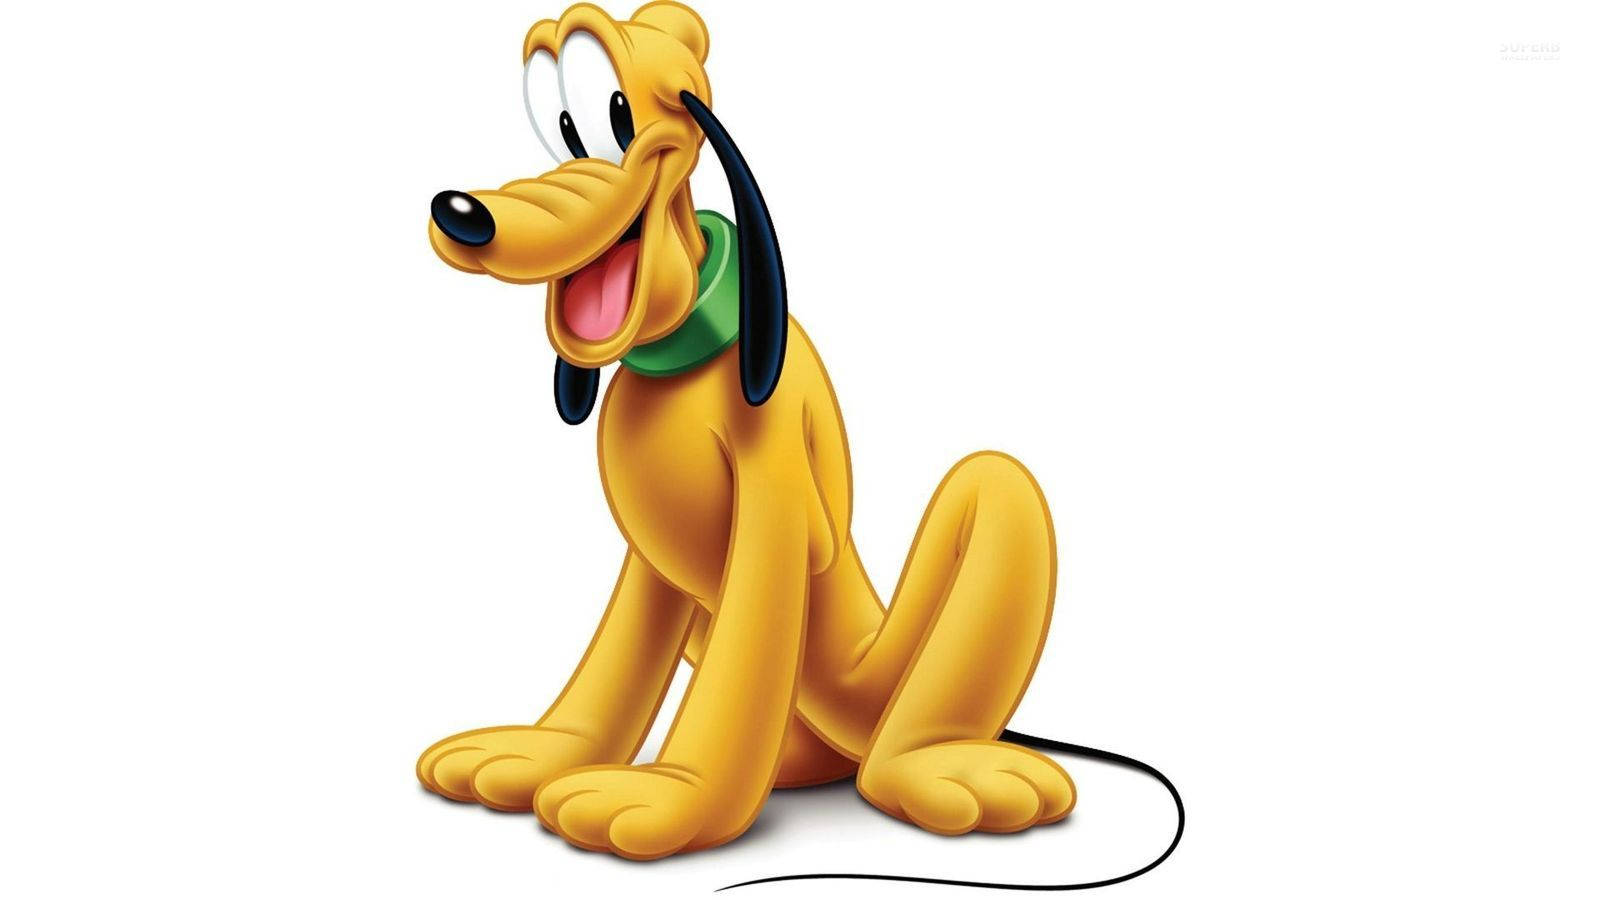 Disney's Cheerful Pluto Playing Fetch In The Green Park Background